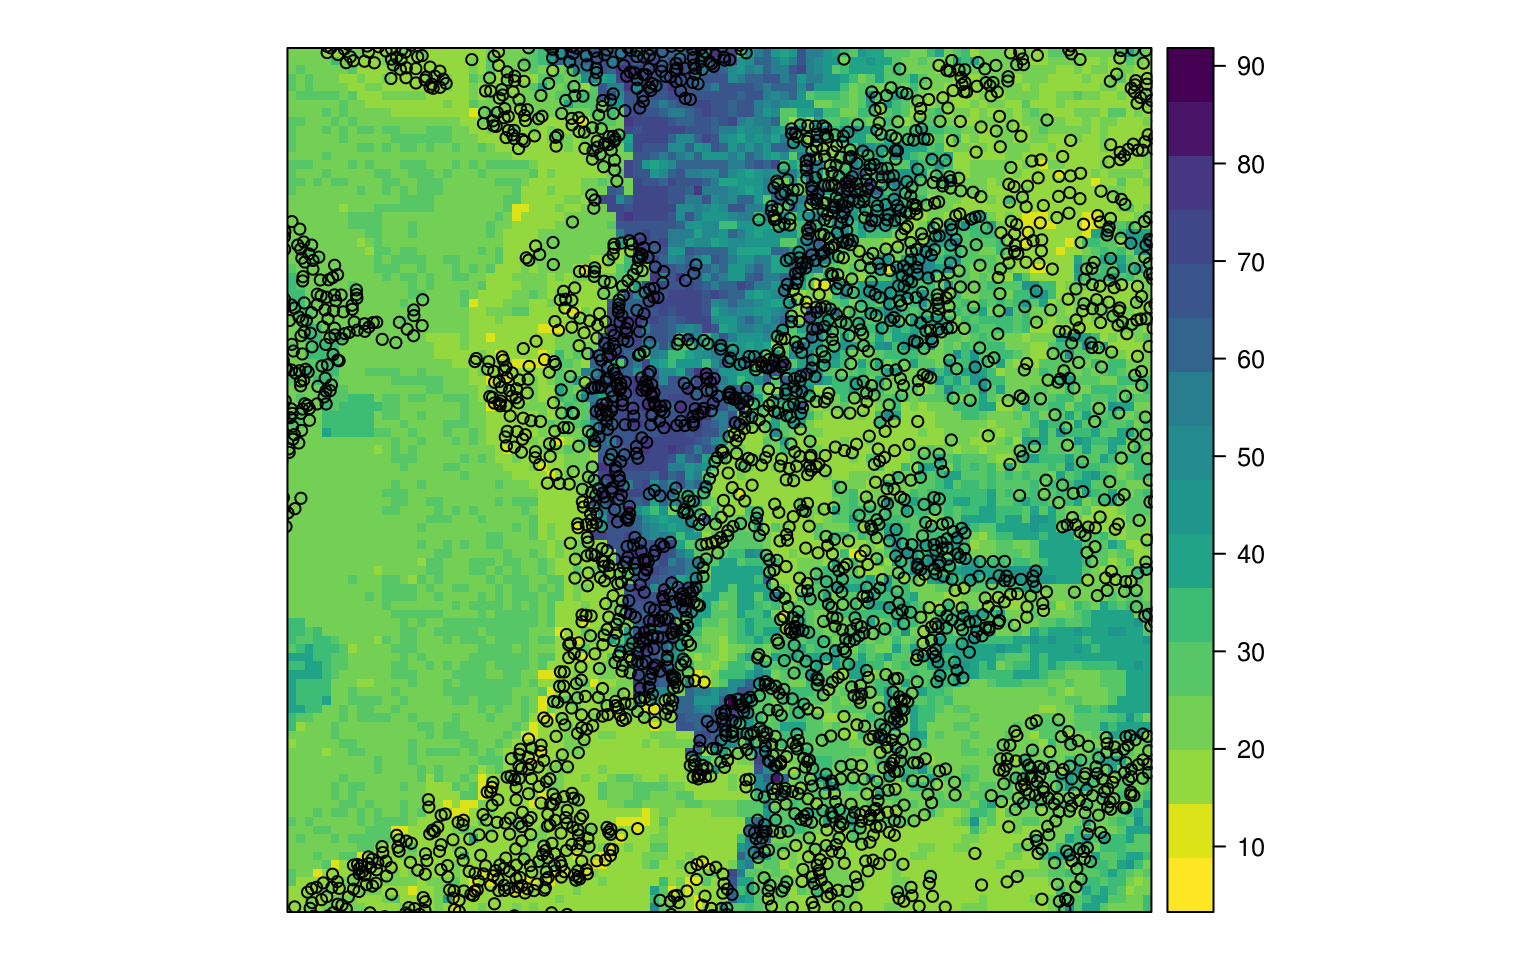 Predicted sand content based on random forest.